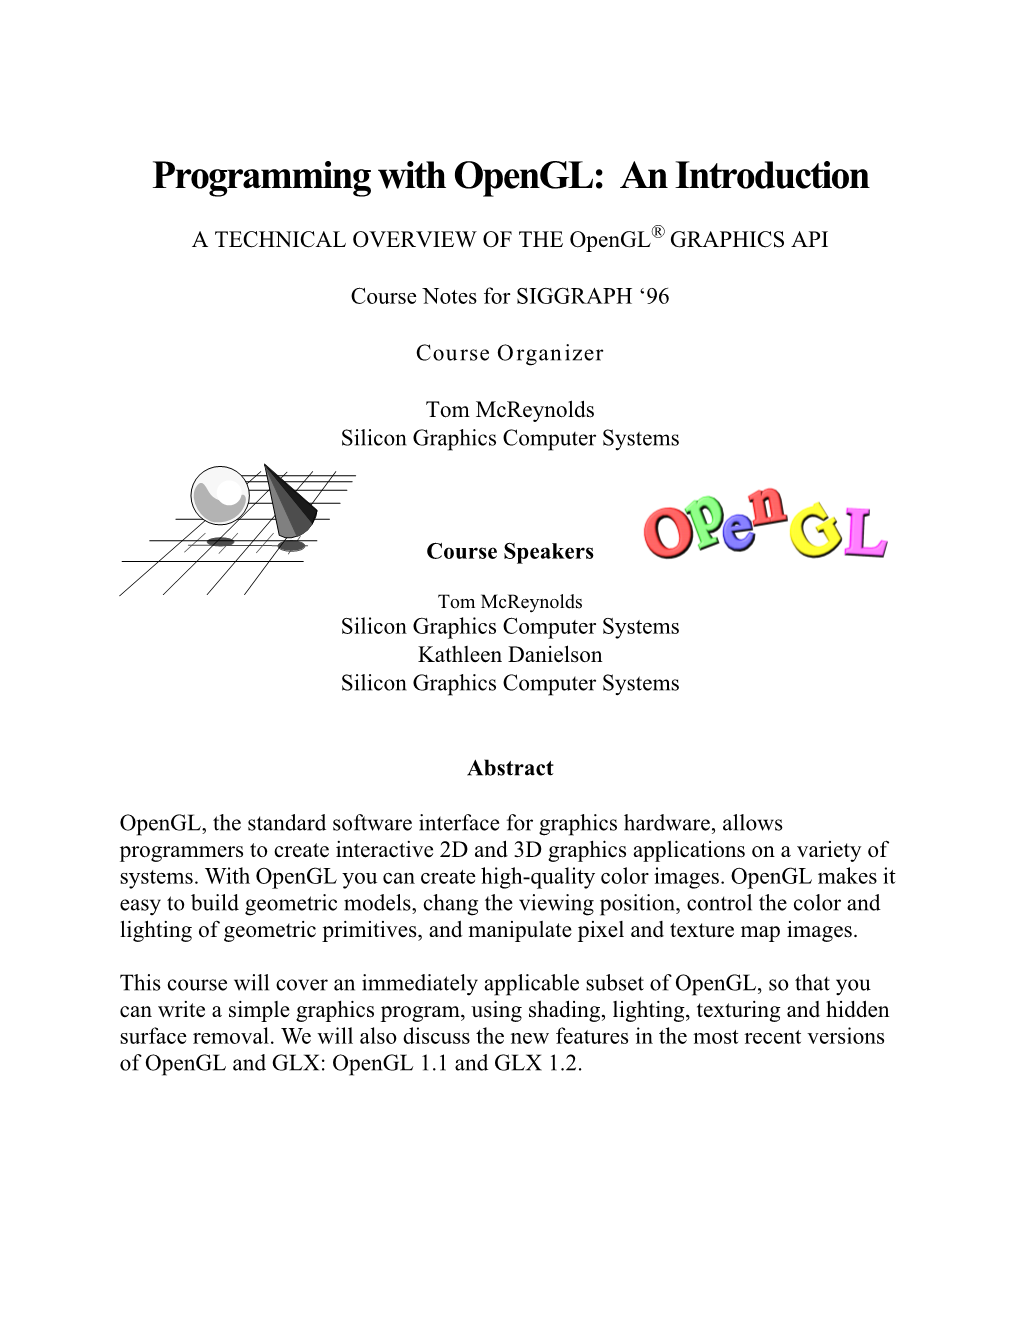 Programming with Opengl: an Introduction